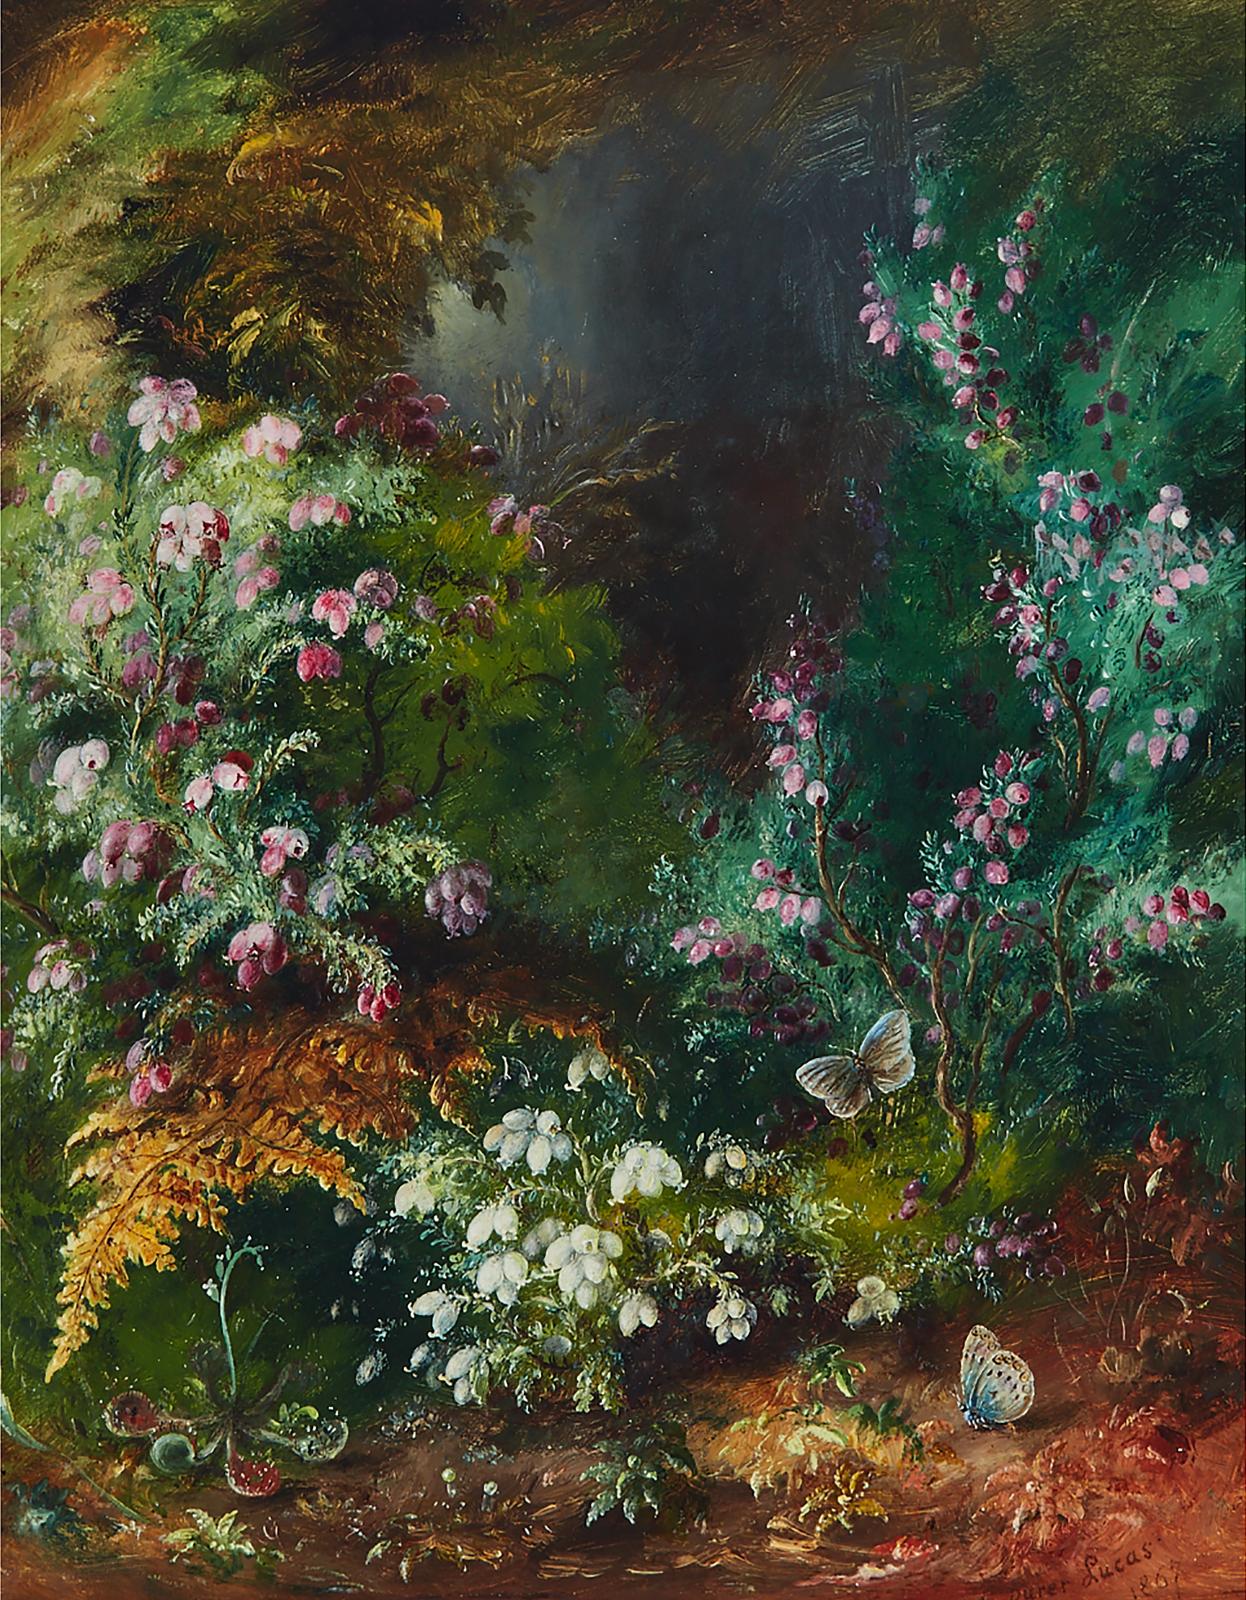 Spring Flowers On A Mossy Bank With Cross-Leaved Heather, Bladder Campion, Ferns And Butterflies; Primroses On A Mossy Bank, Circa 1867 by artist Albert Durer Lucas